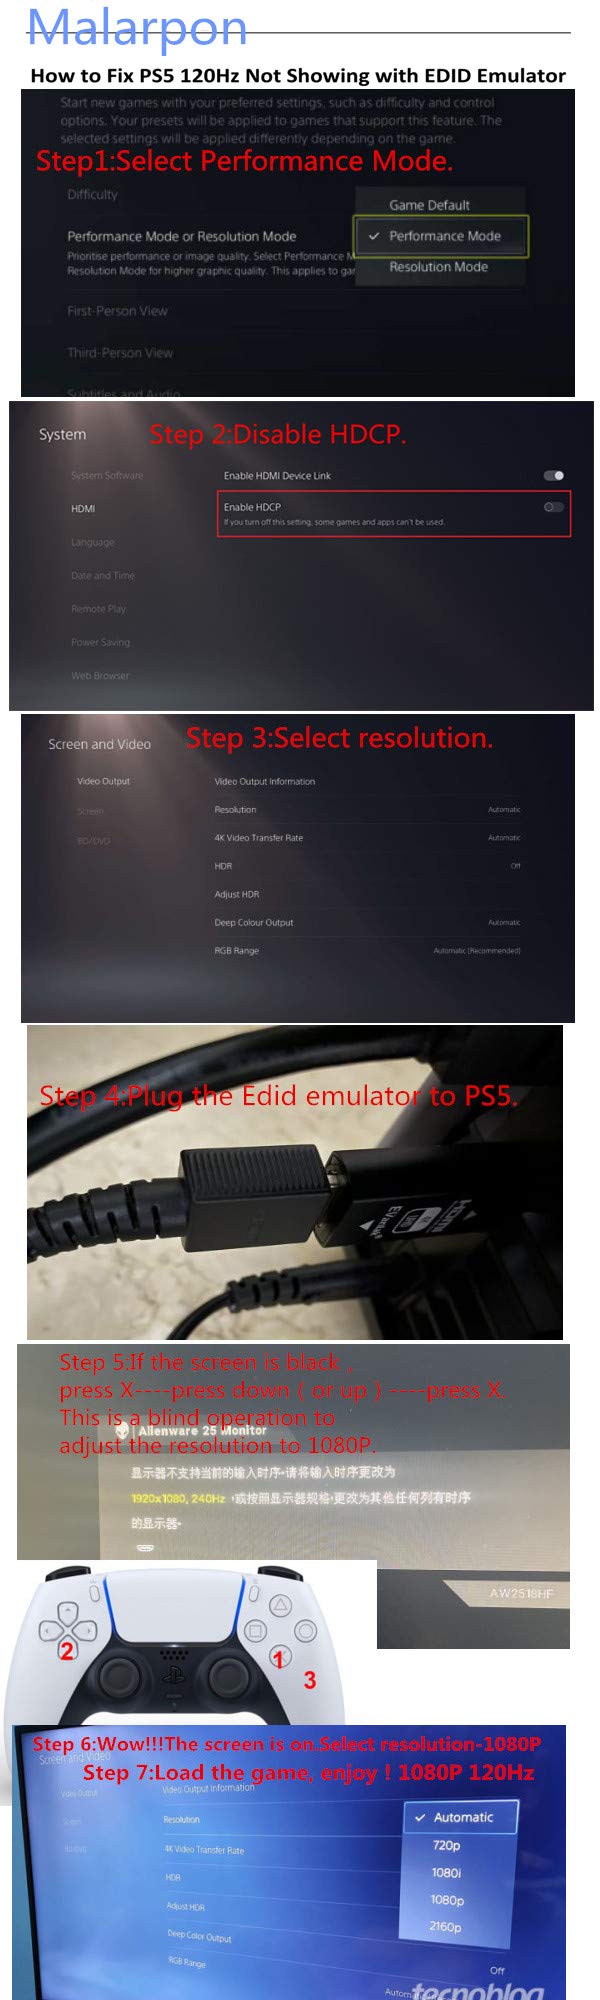 Hdmi Edid Emulator Passthrough 3rd Generrtion Aluminum fit Headlesskeep The EDID of The Monitor Active Switches and Extenders 3840x2160@59Hz 2P HDMI EDID 4K-2P